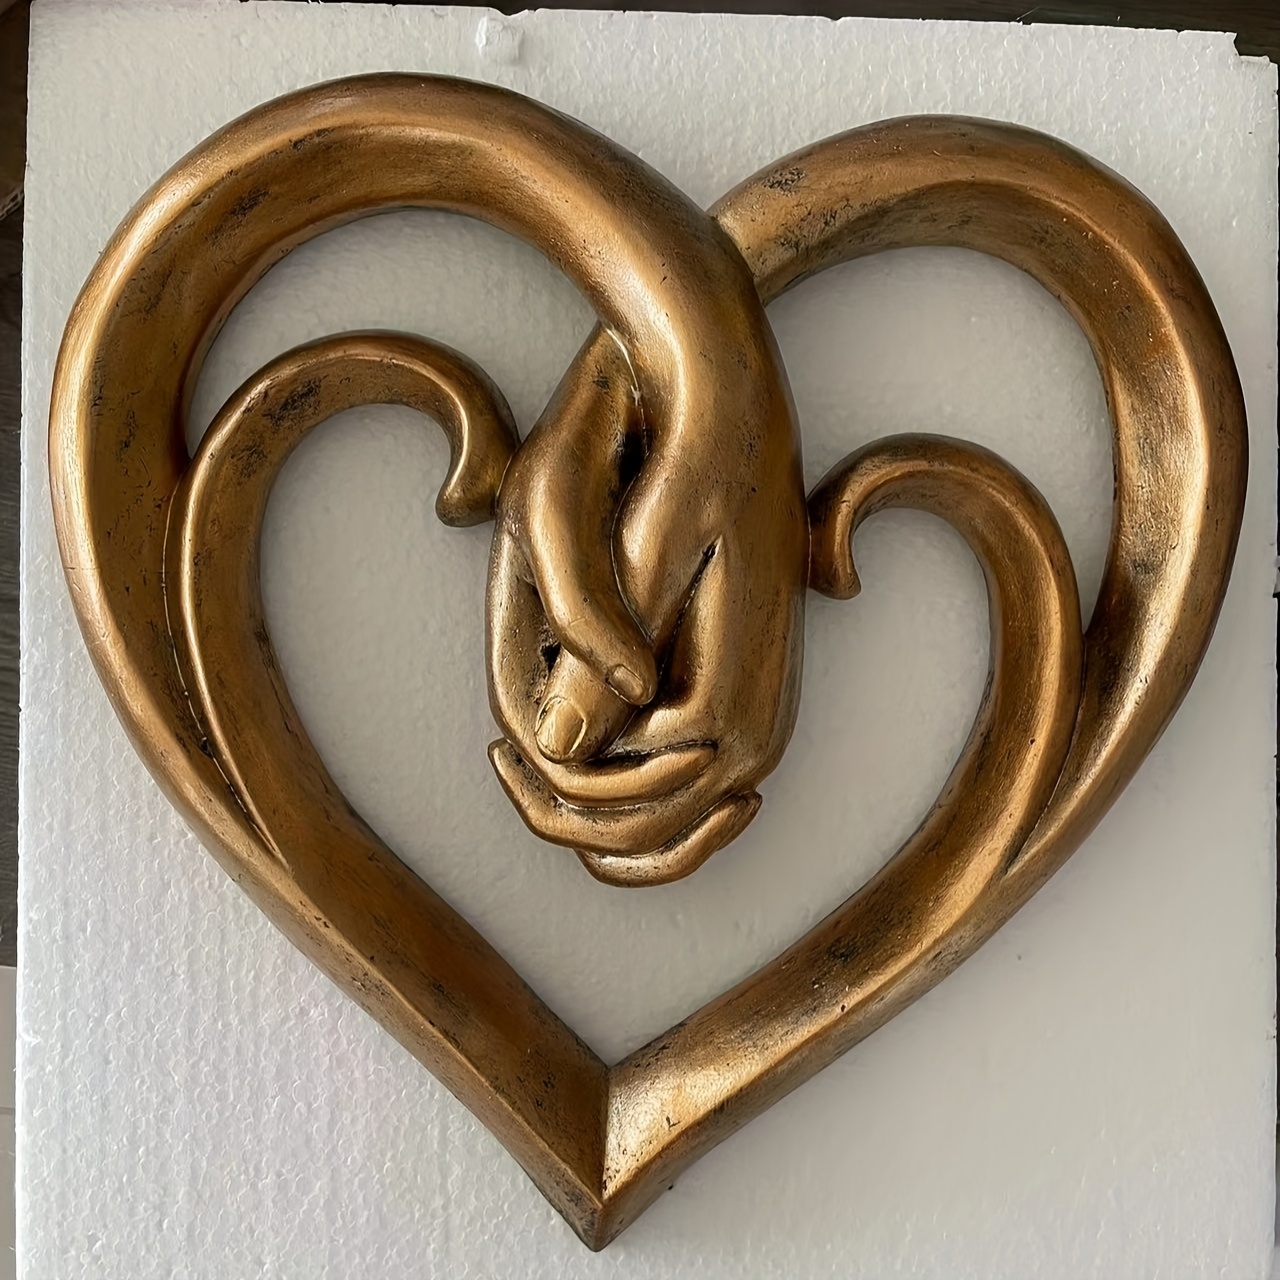  Top Brass Heart Holding Hands Wall Decor Decorative Art  Sculpture - Faux Wood Finish - Forever Love : Home & Kitchen